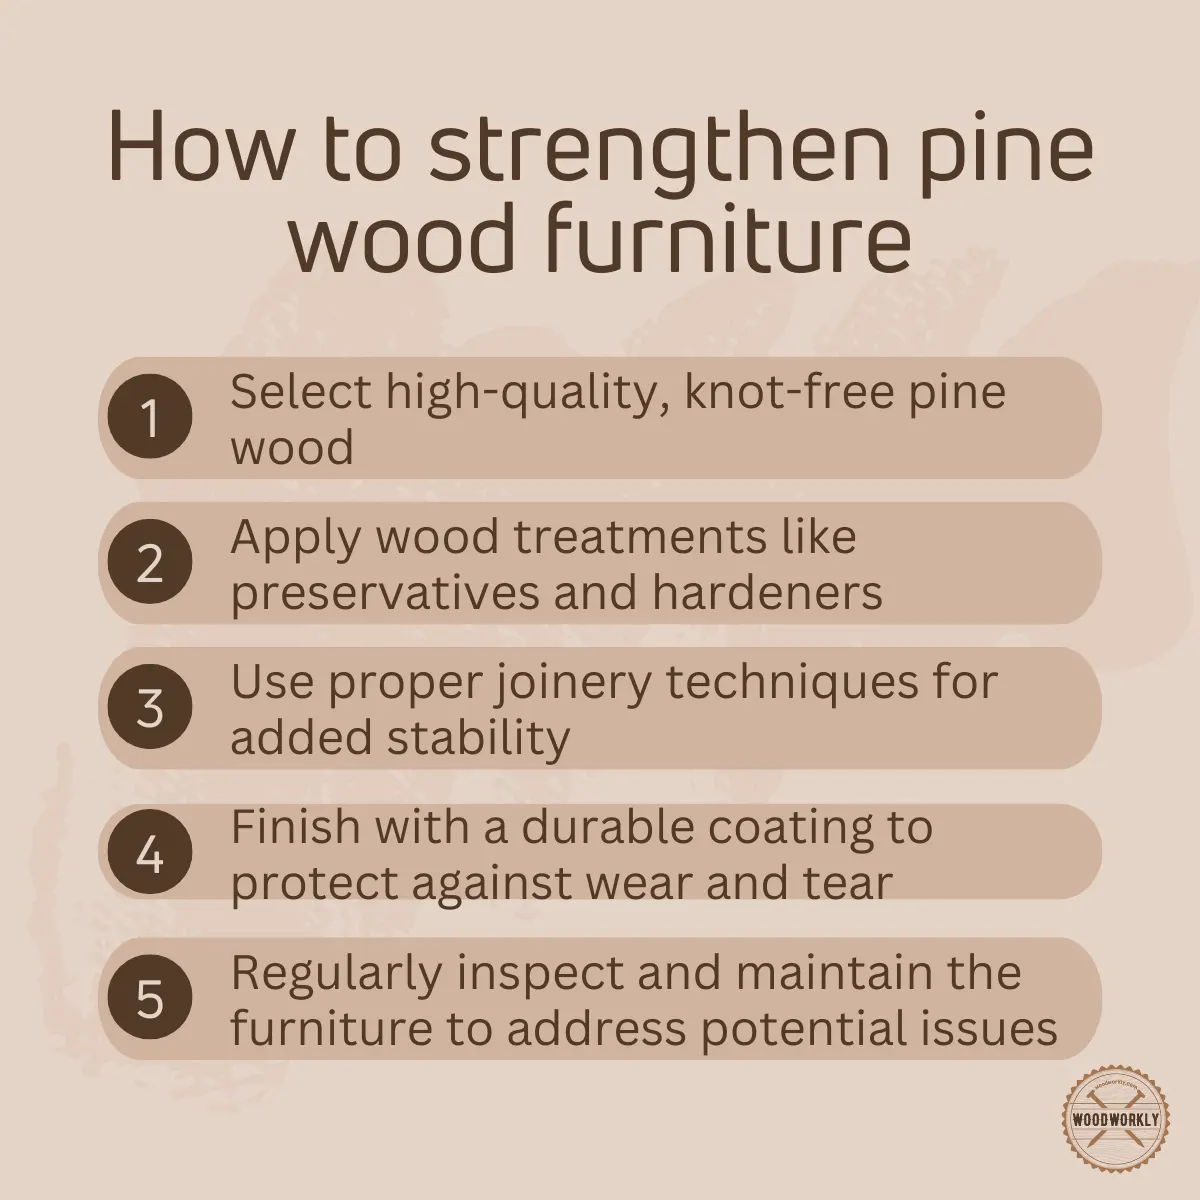 How to strengthen pine wood furniture